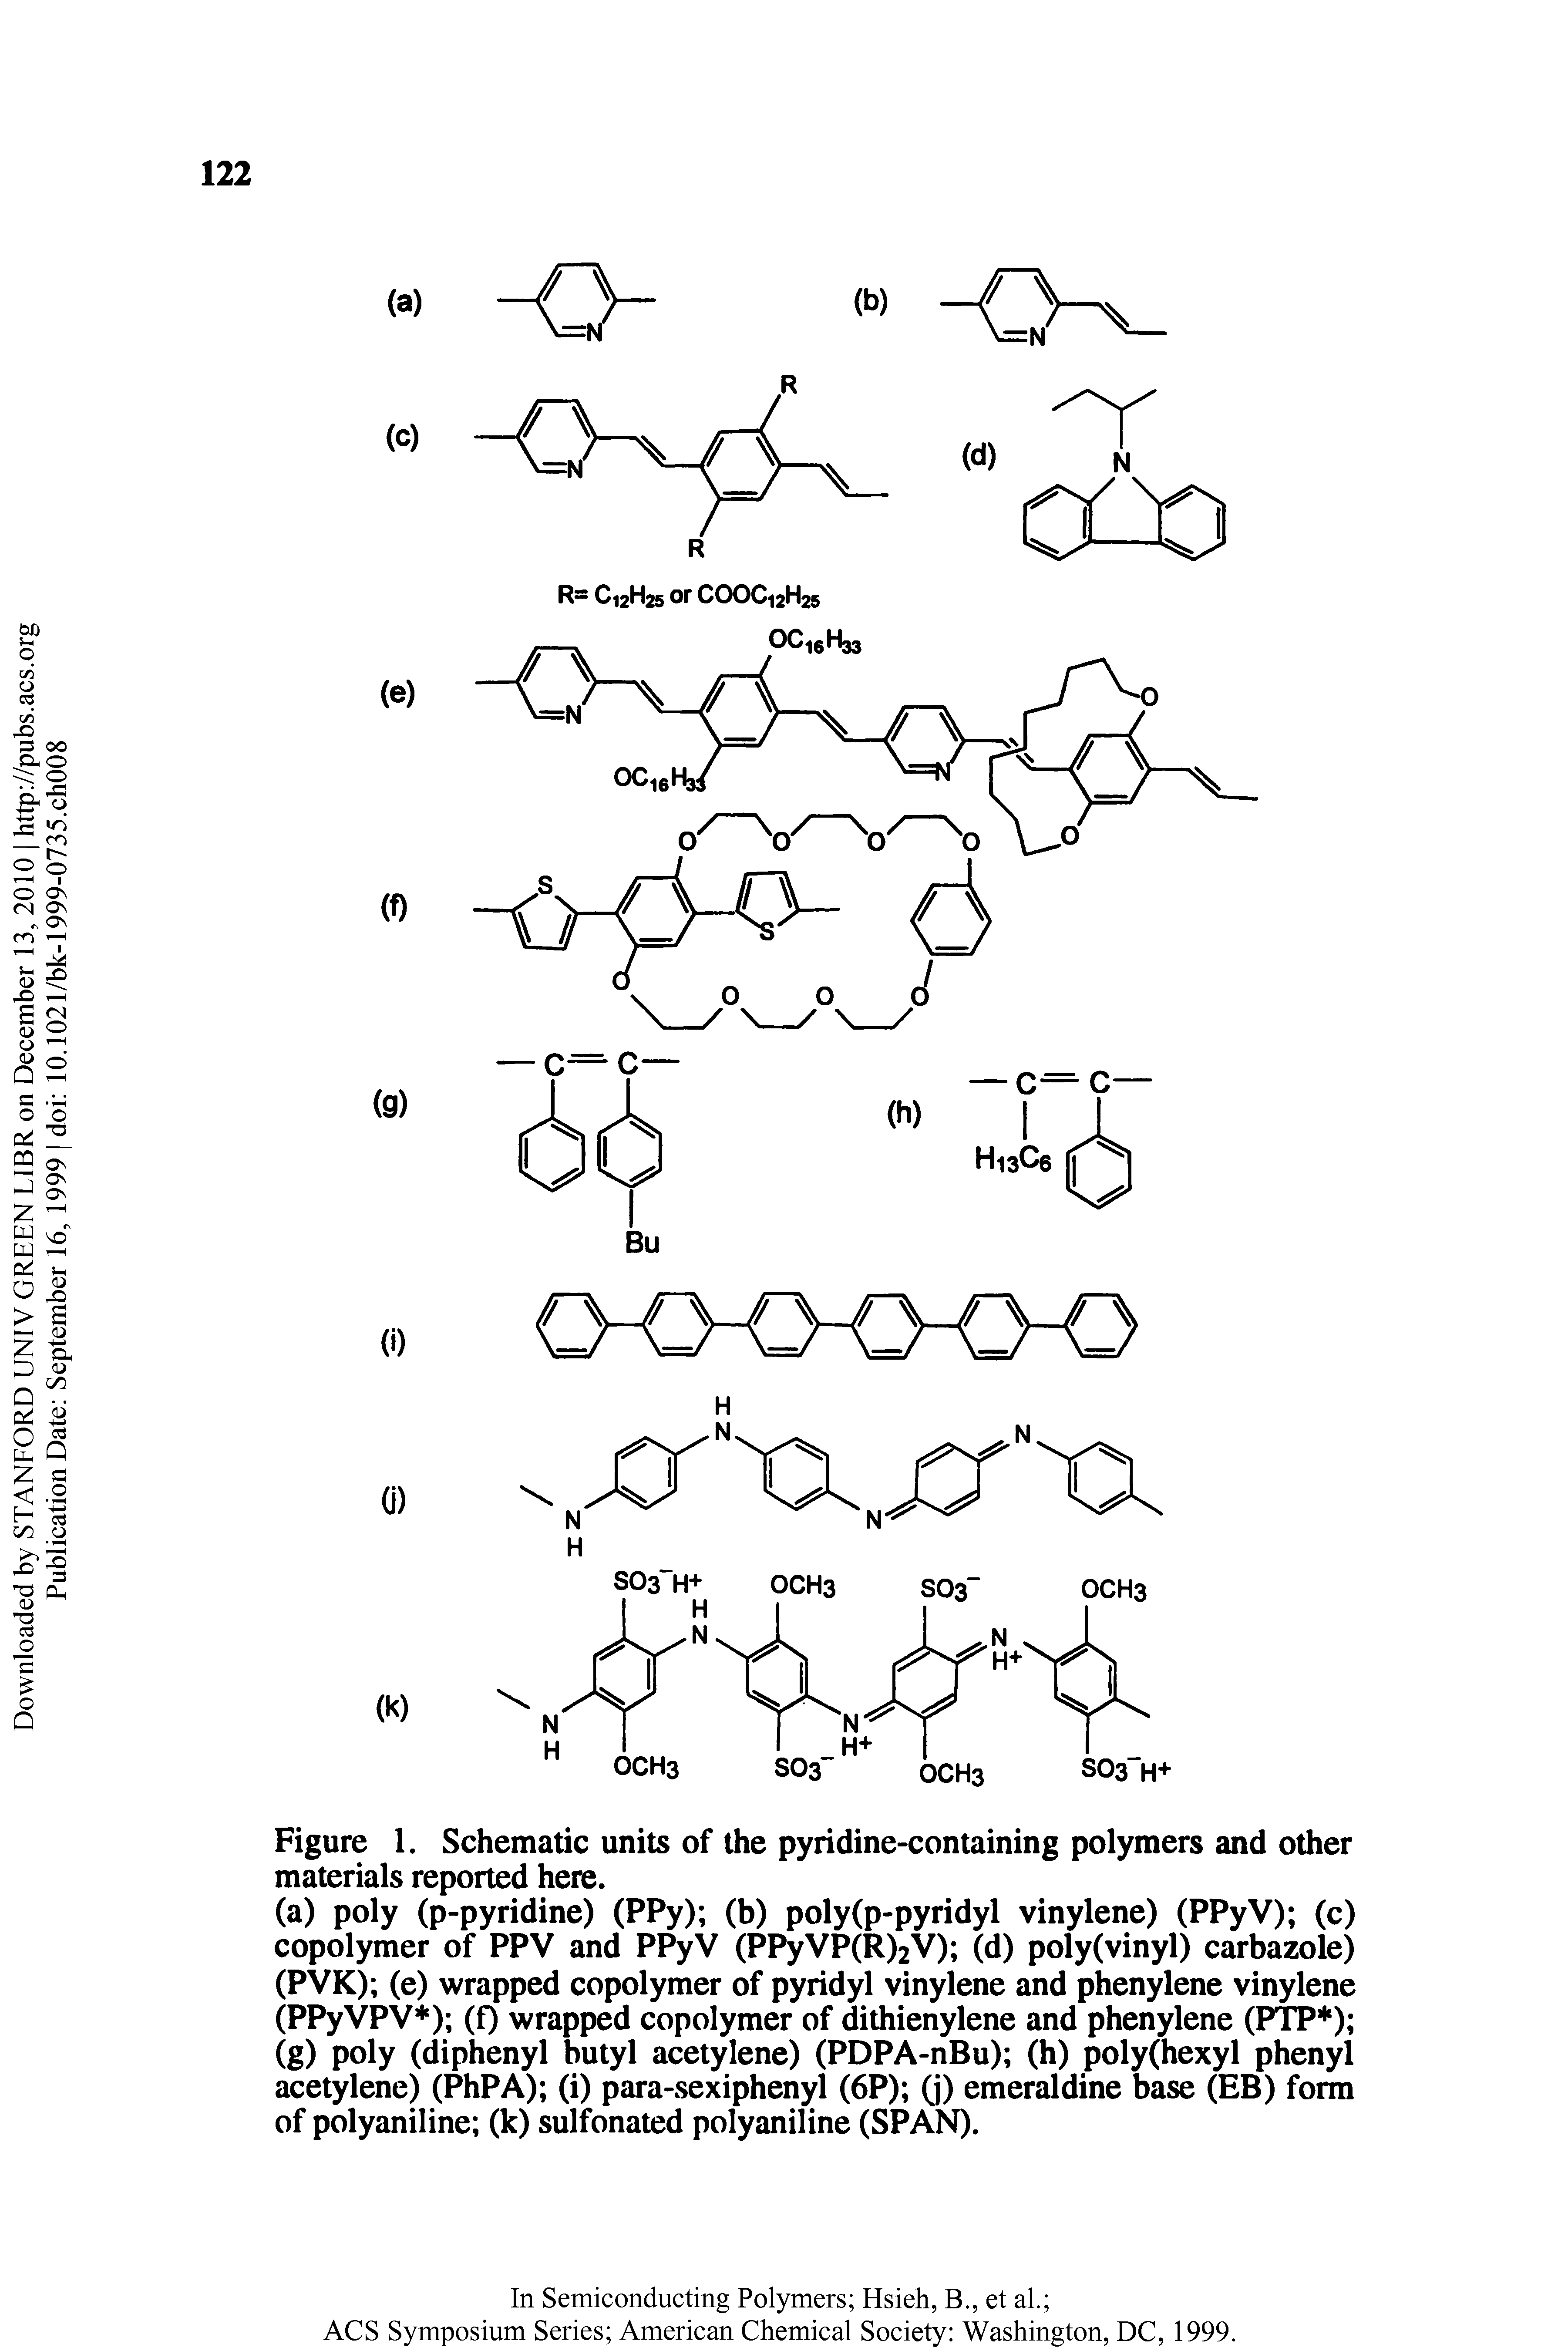 Figure 1. Schematic units of the pyridine-containing polymers and other materials reported here.